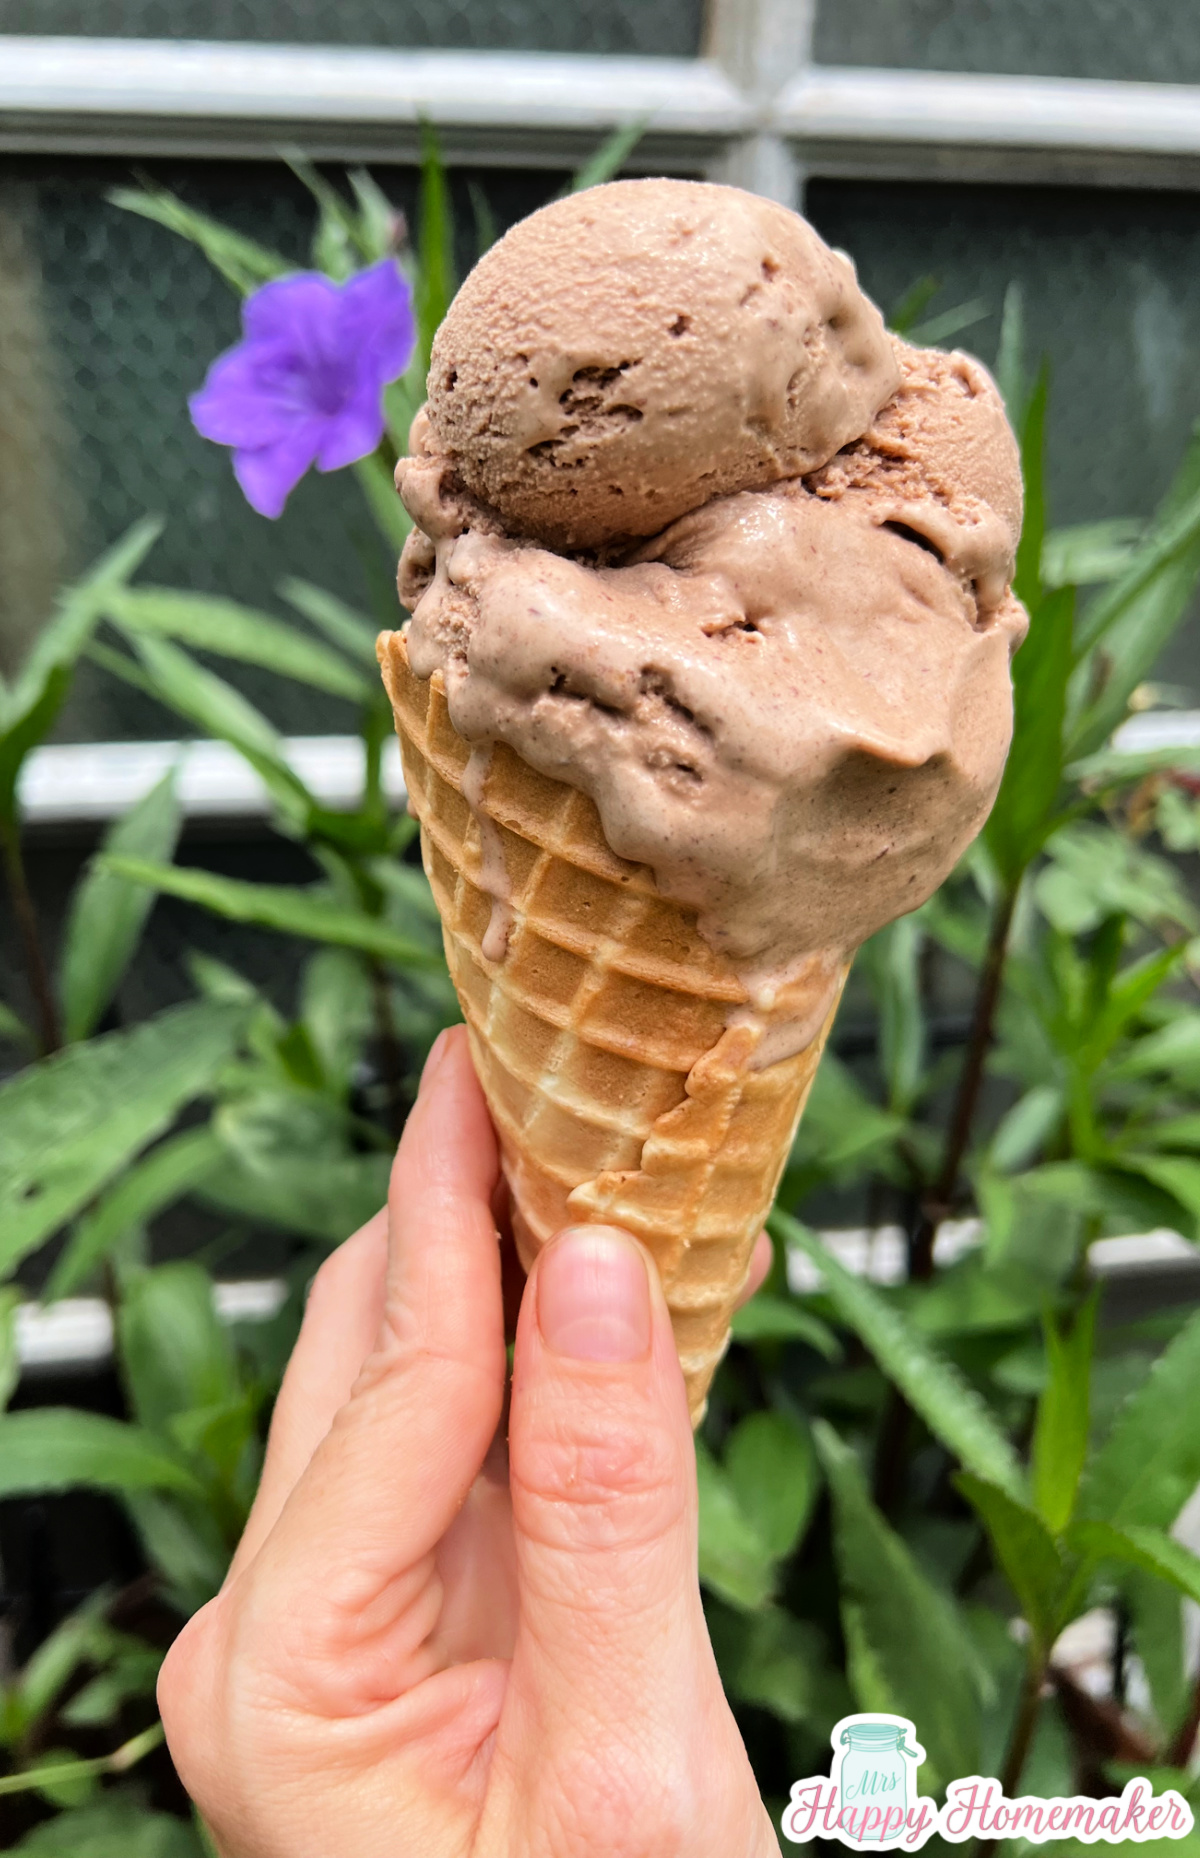 Homemade chocolate ice cream in a cone infront of a purple flower